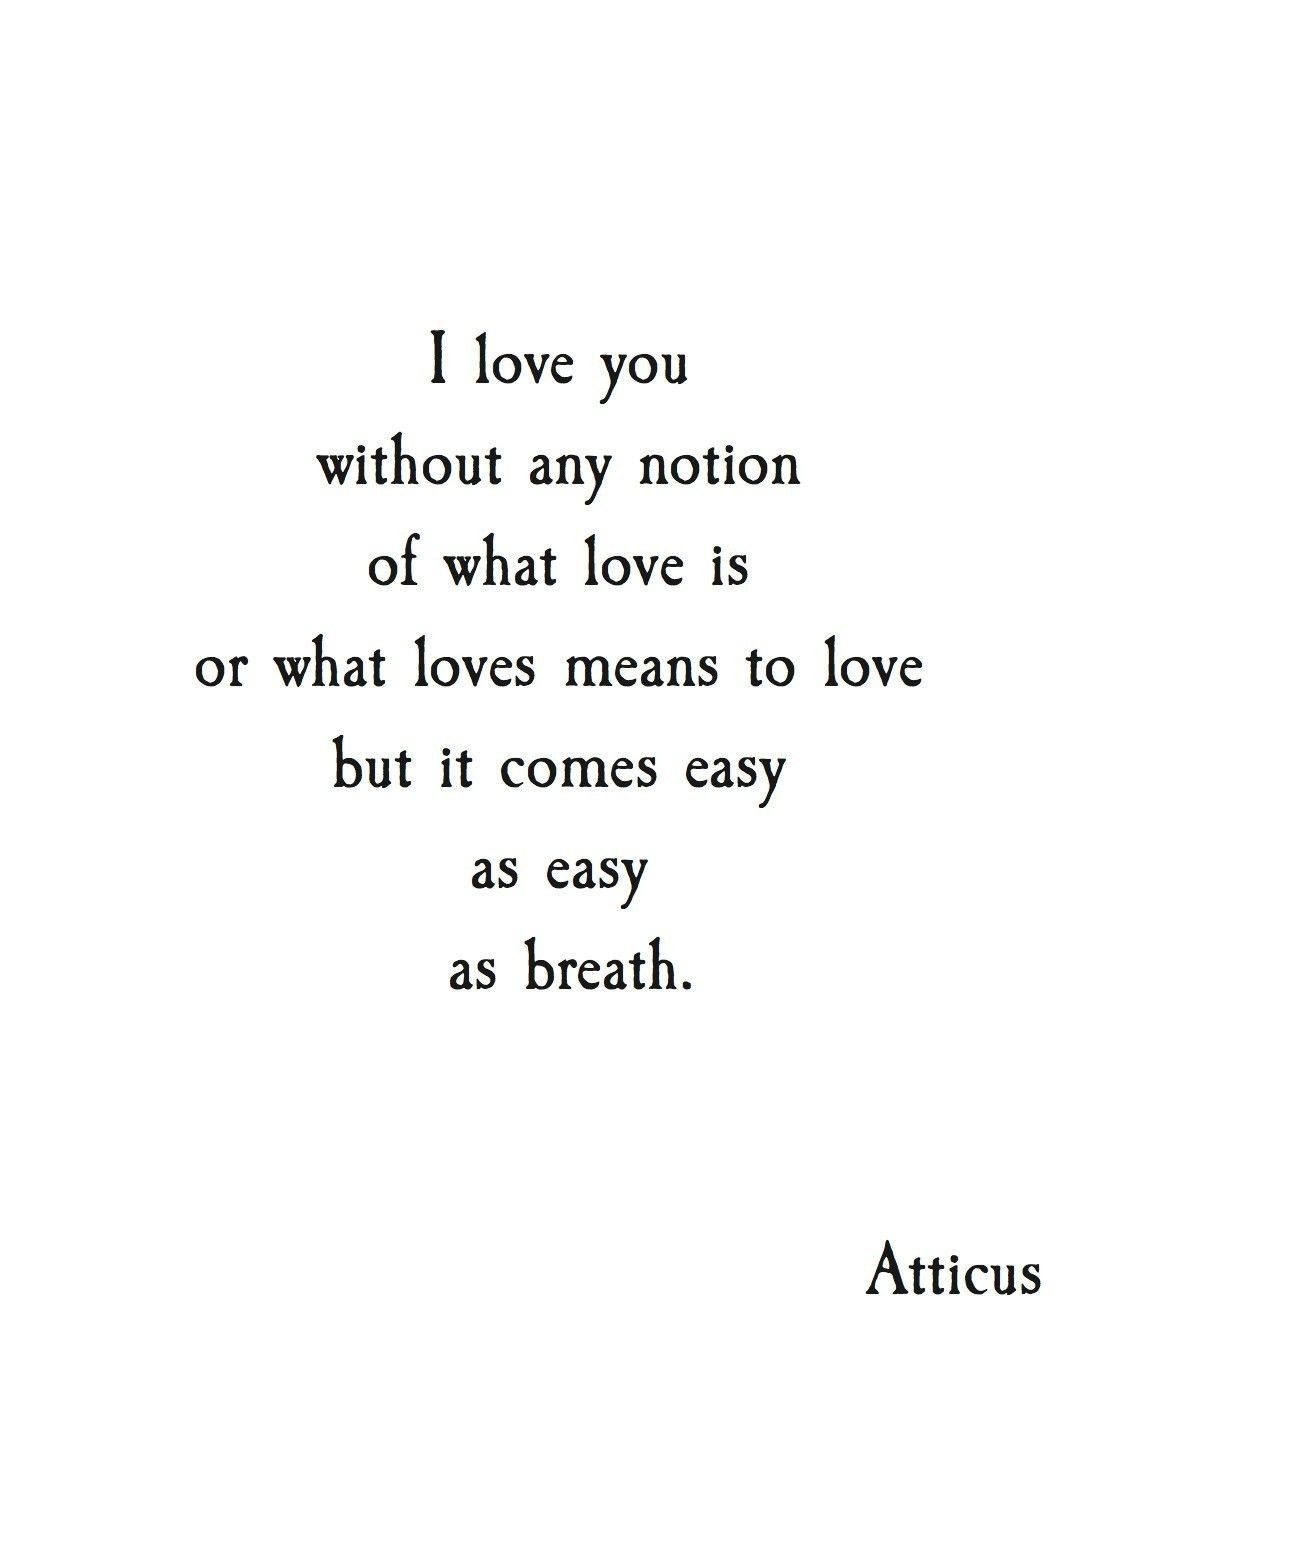 The Best Ideas for atticus Love Quotes - Home, Family, Style and Art Ideas